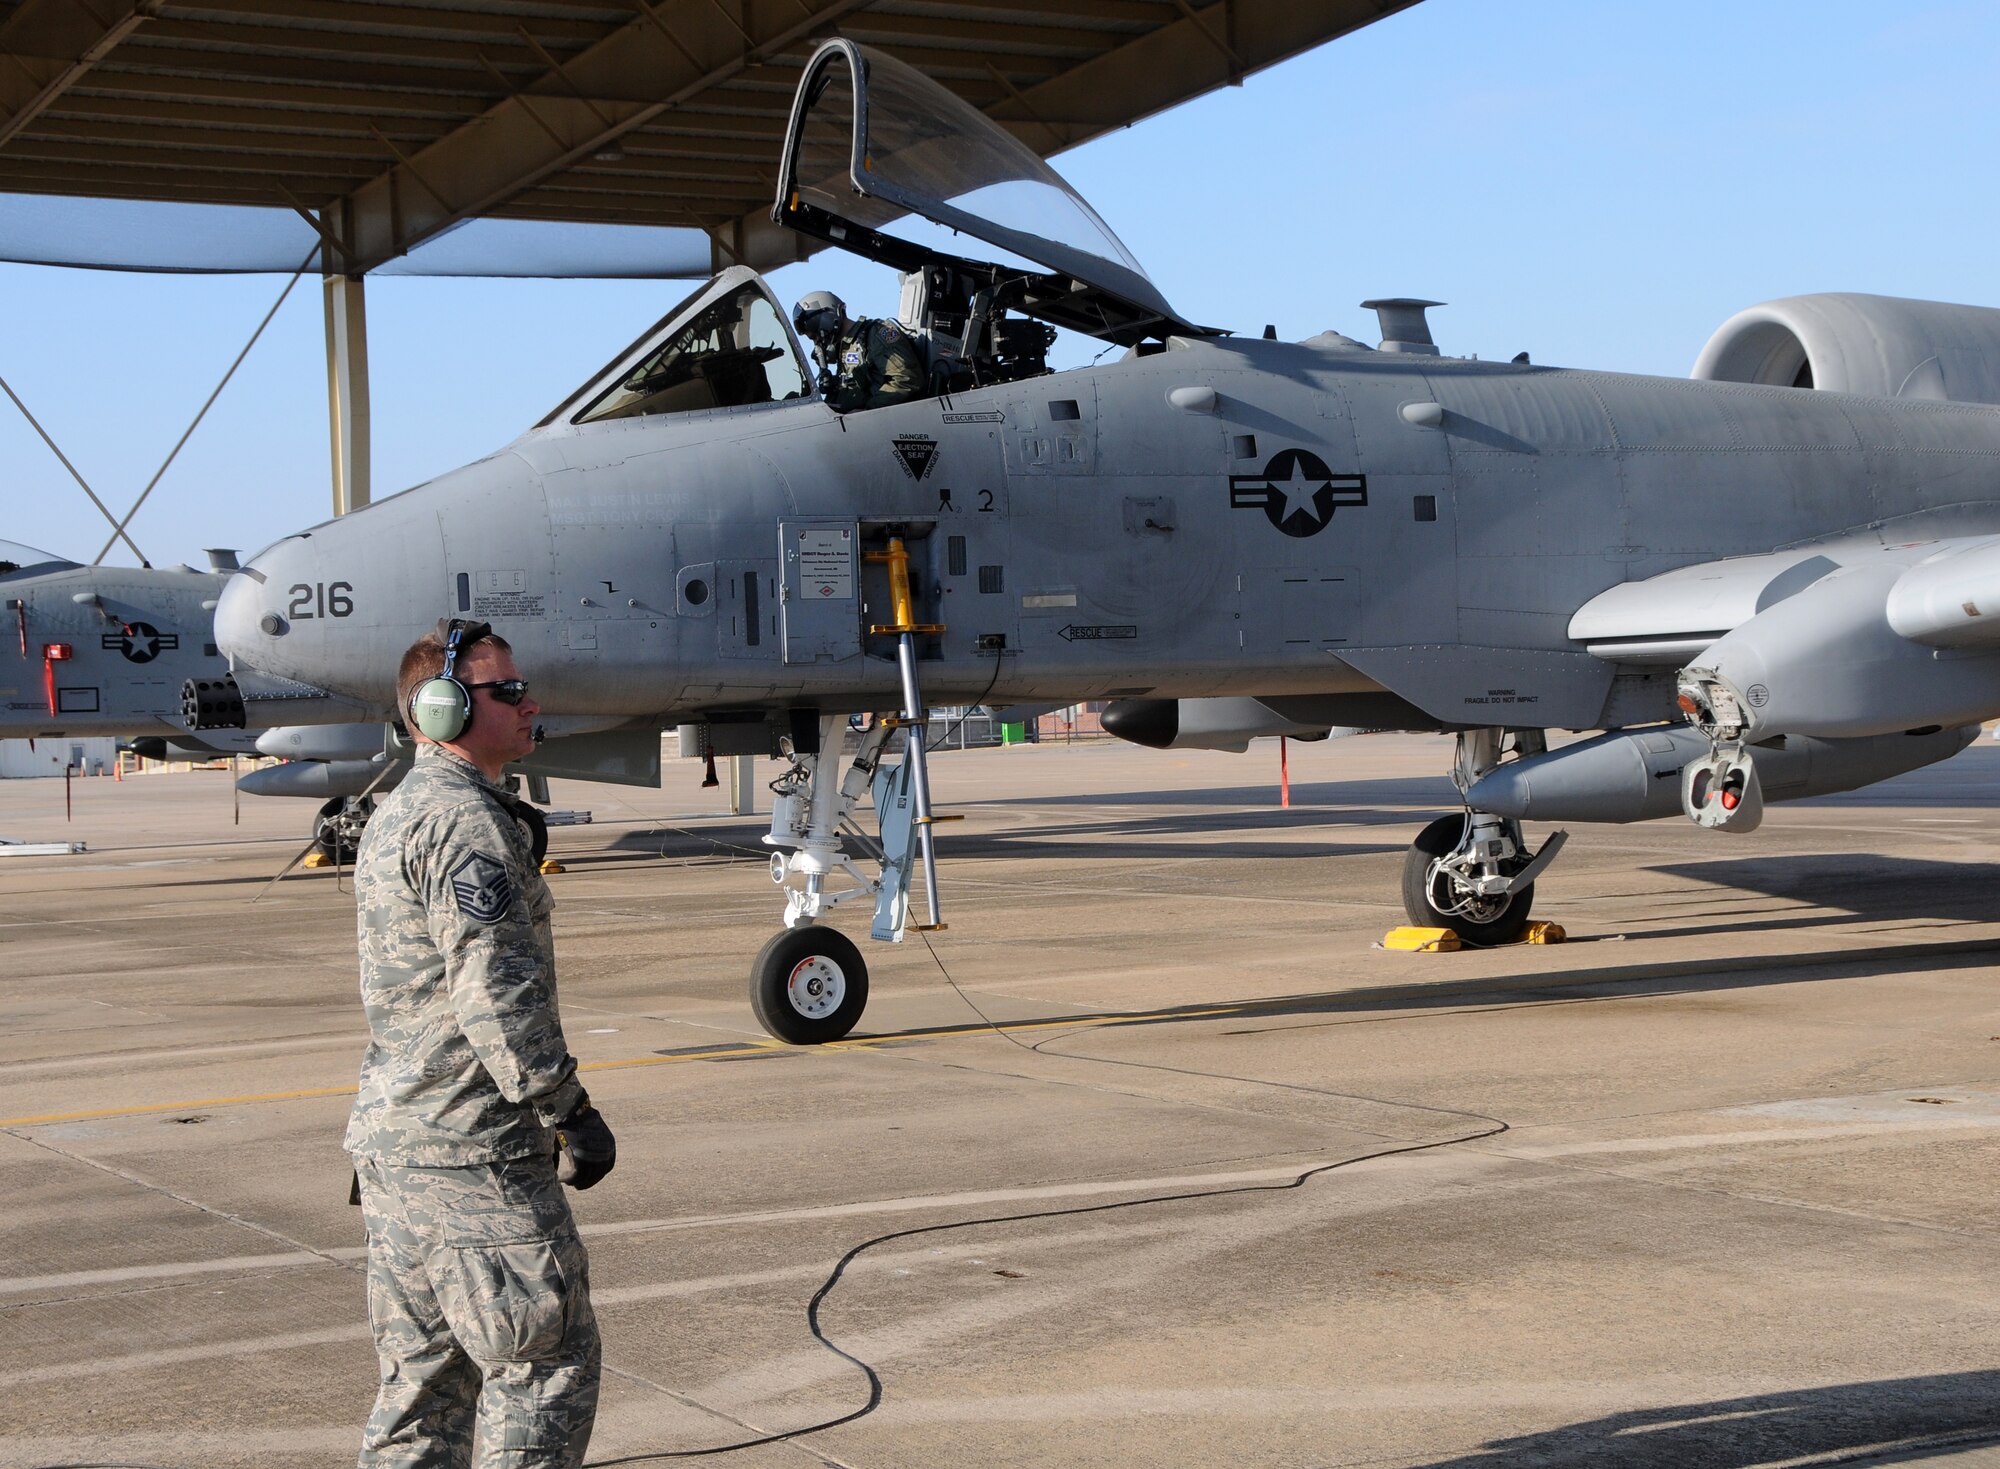 Master Sgt. Tony Crockett of the 188th Aircraft Maintenance Squadron and 1st Lt. Ellis Moser of the 74th Fighter Squadron conduct preflight inspections March 6, 2014. Moser delivered the A-10C Thunderbolt II “Warthog” (Tail No. 216) to Moody Air Force Base, Ga., as part of the 188th Fighter Wing’s conversion from the A-10 to a remotely piloted aircraft, intelligence and targeting mission. The 188th has six remaining A-10s on station. (U.S. Air National Guard photo by Senior Airman John Hillier/released)